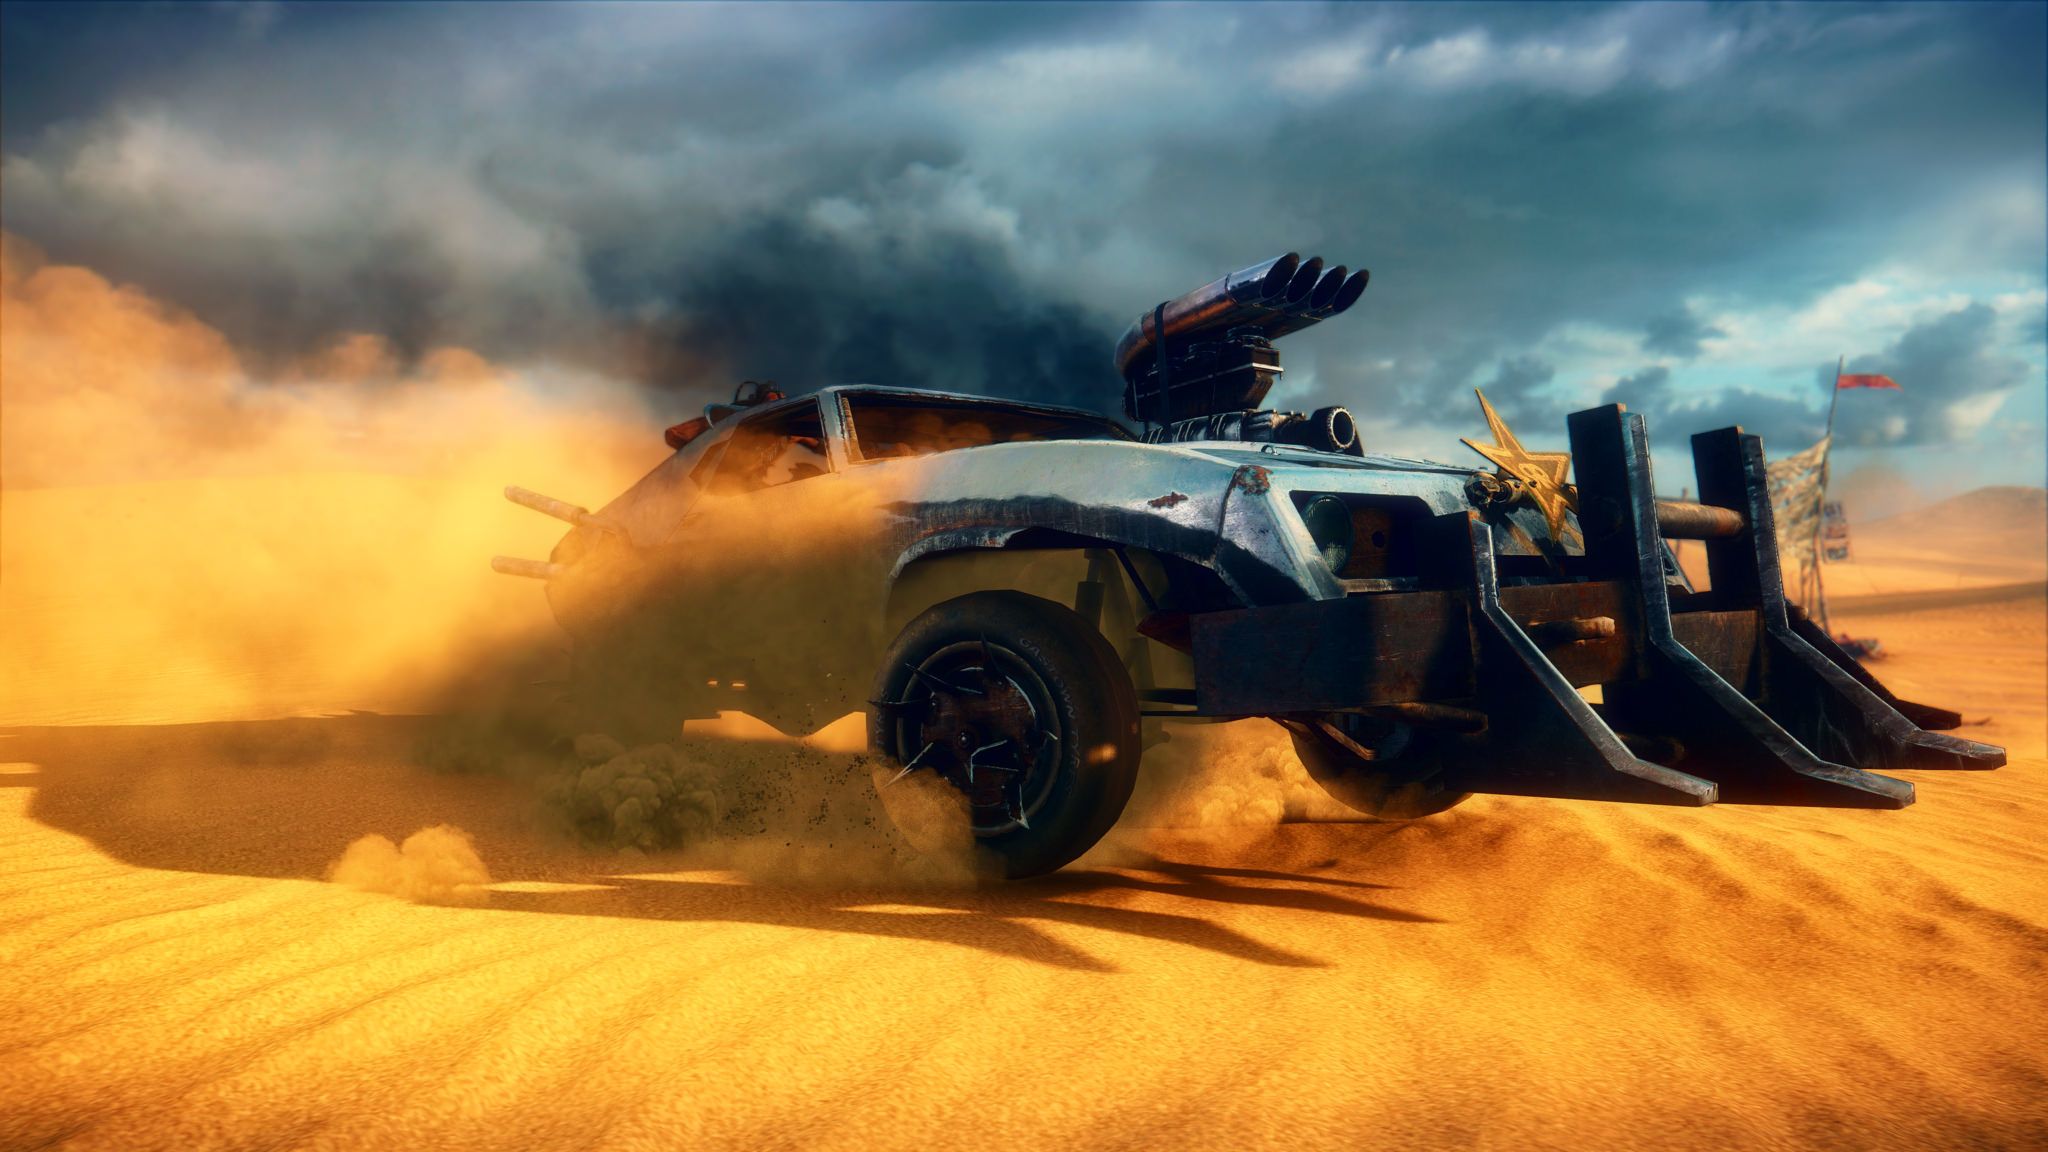 1979 film Mad Max is coming to 4K in November